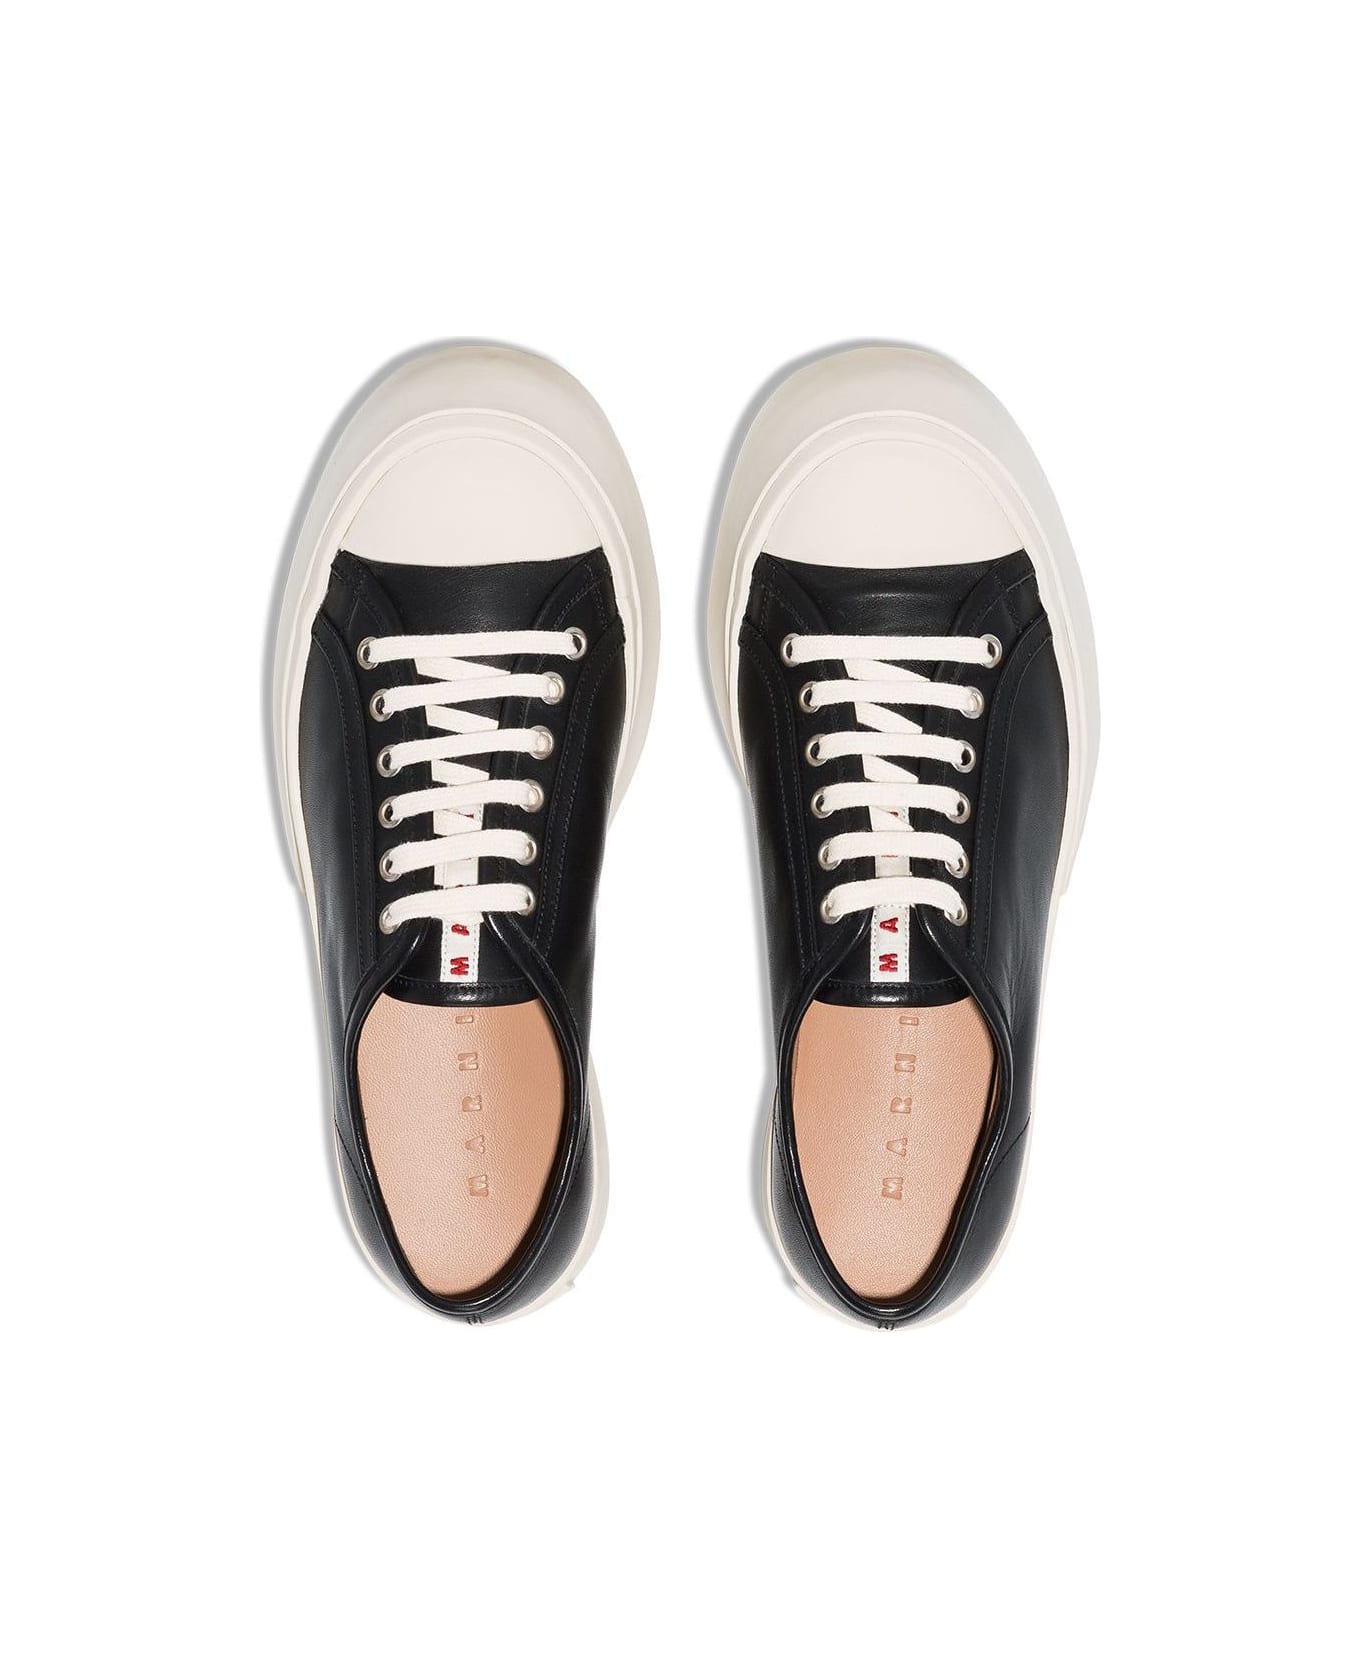 Marni Laced Up Shoes - Black スニーカー